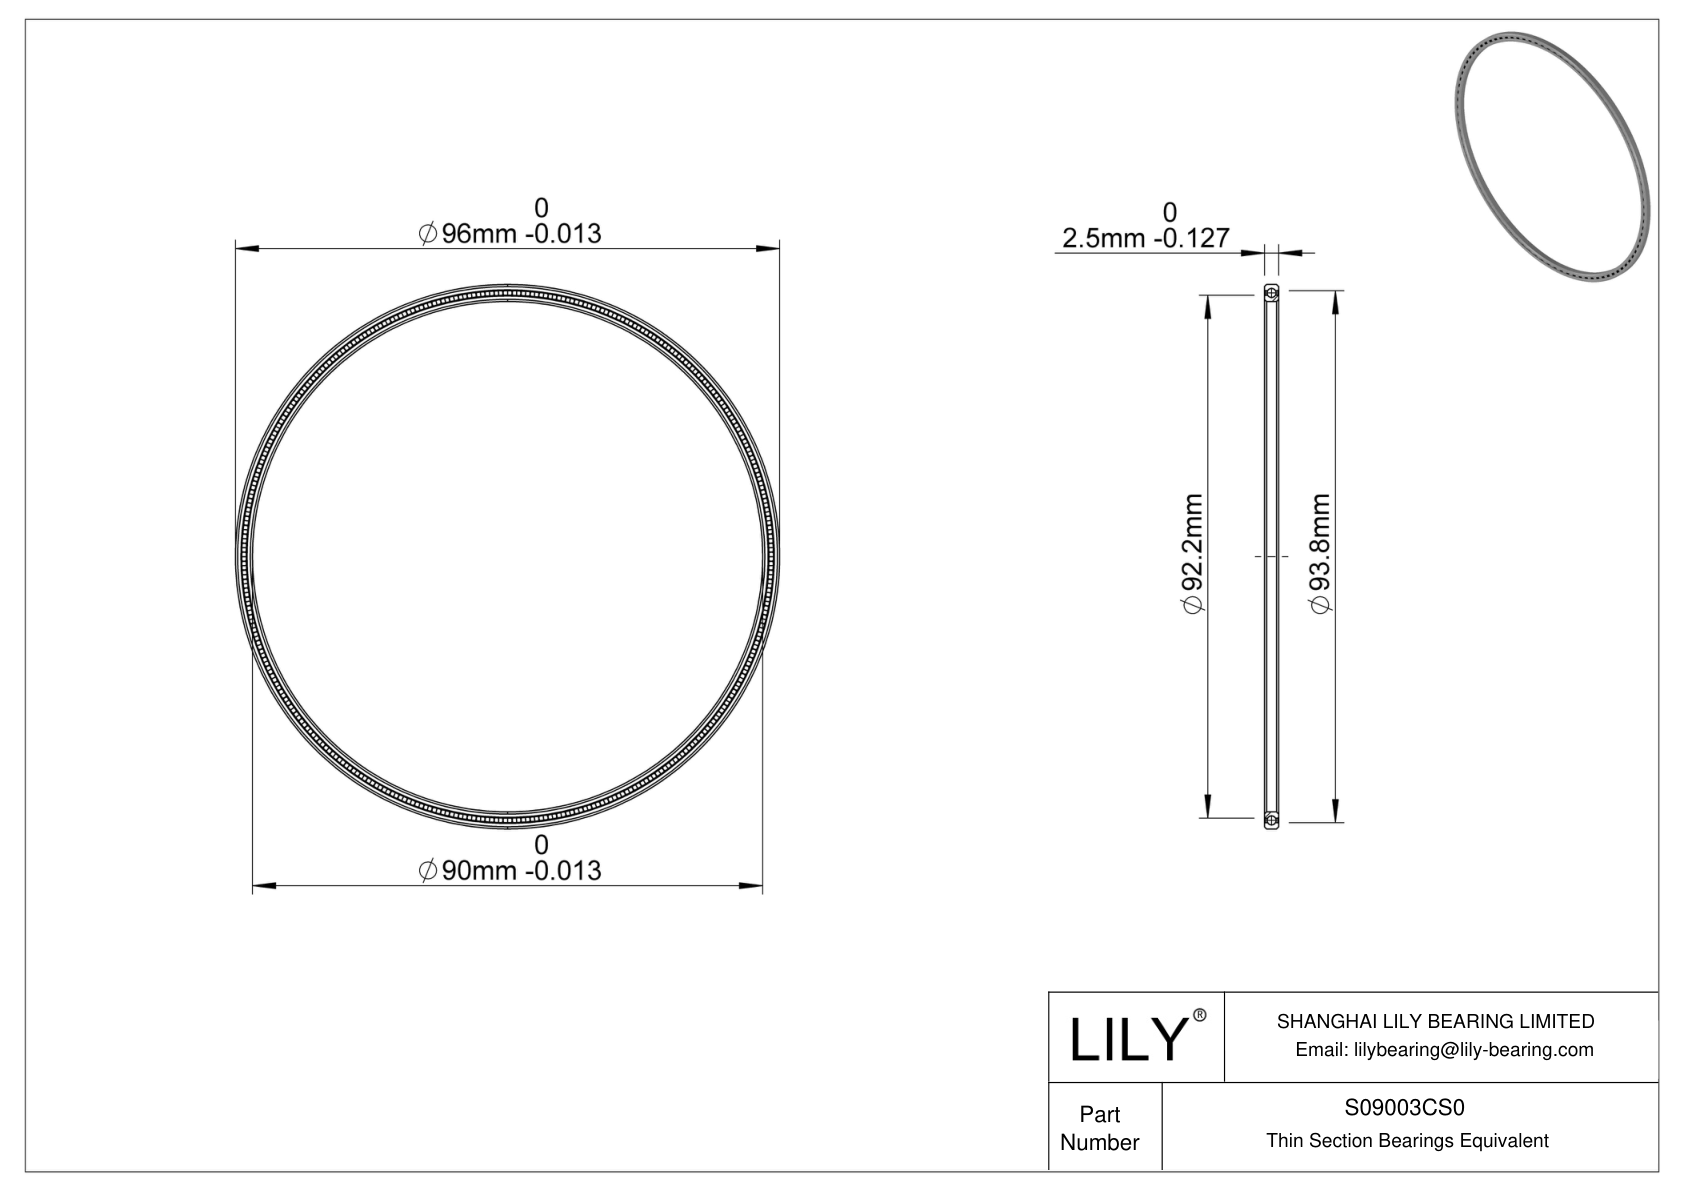 S09003CS0 Constant Section (CS) Bearings cad drawing